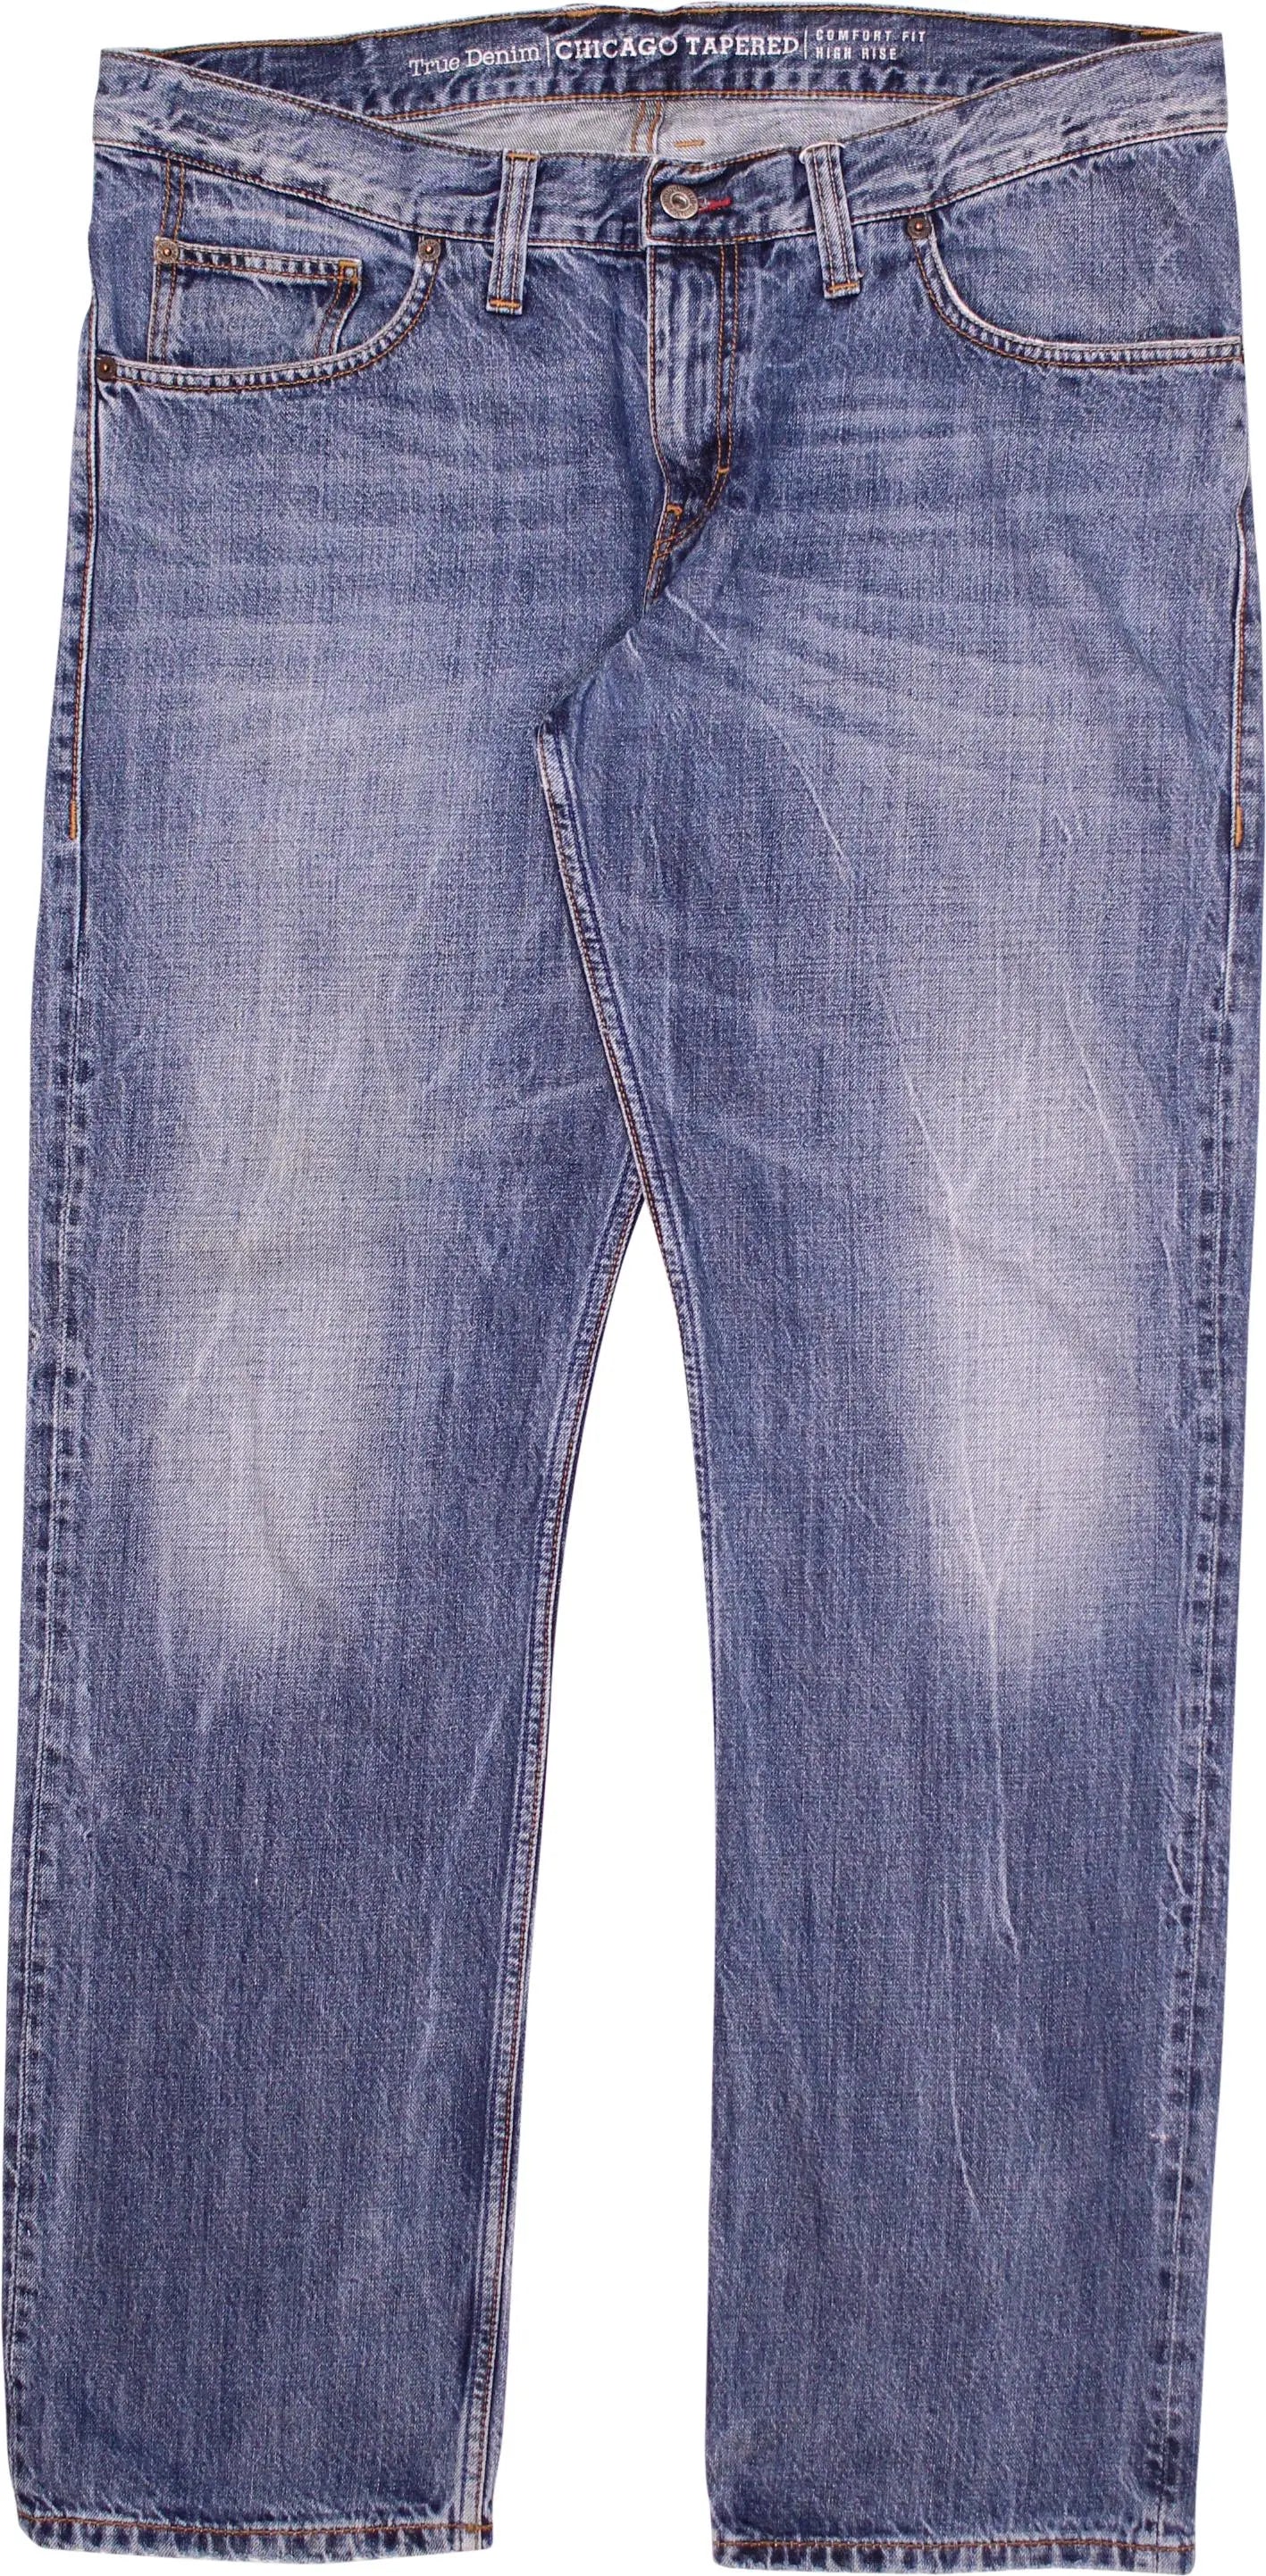 Mustang - Mustang Chicago Tapered Jeans- ThriftTale.com - Vintage and second handclothing